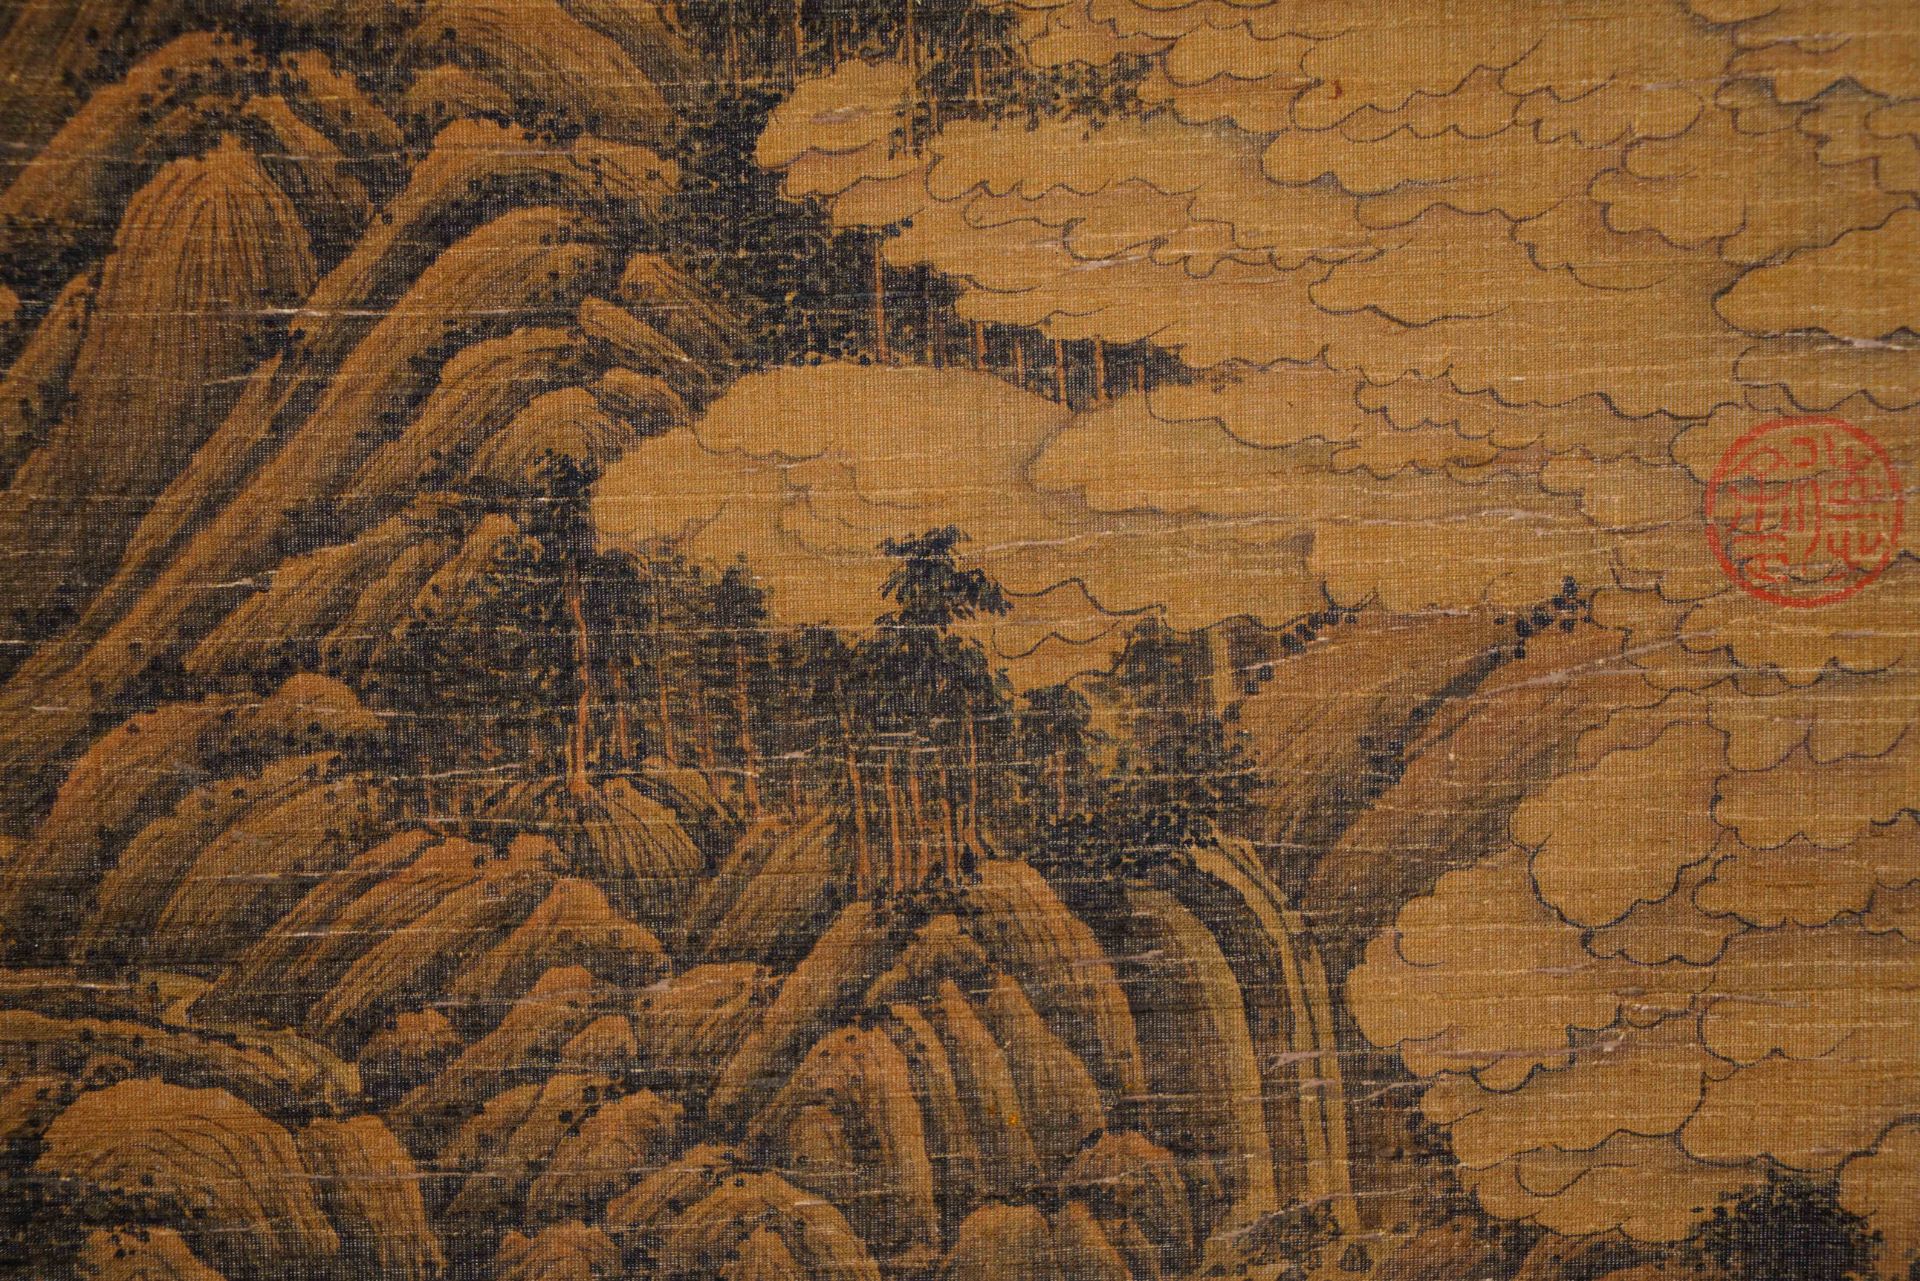 A Chinese Scroll Painting By Dong Yuan - Image 8 of 12